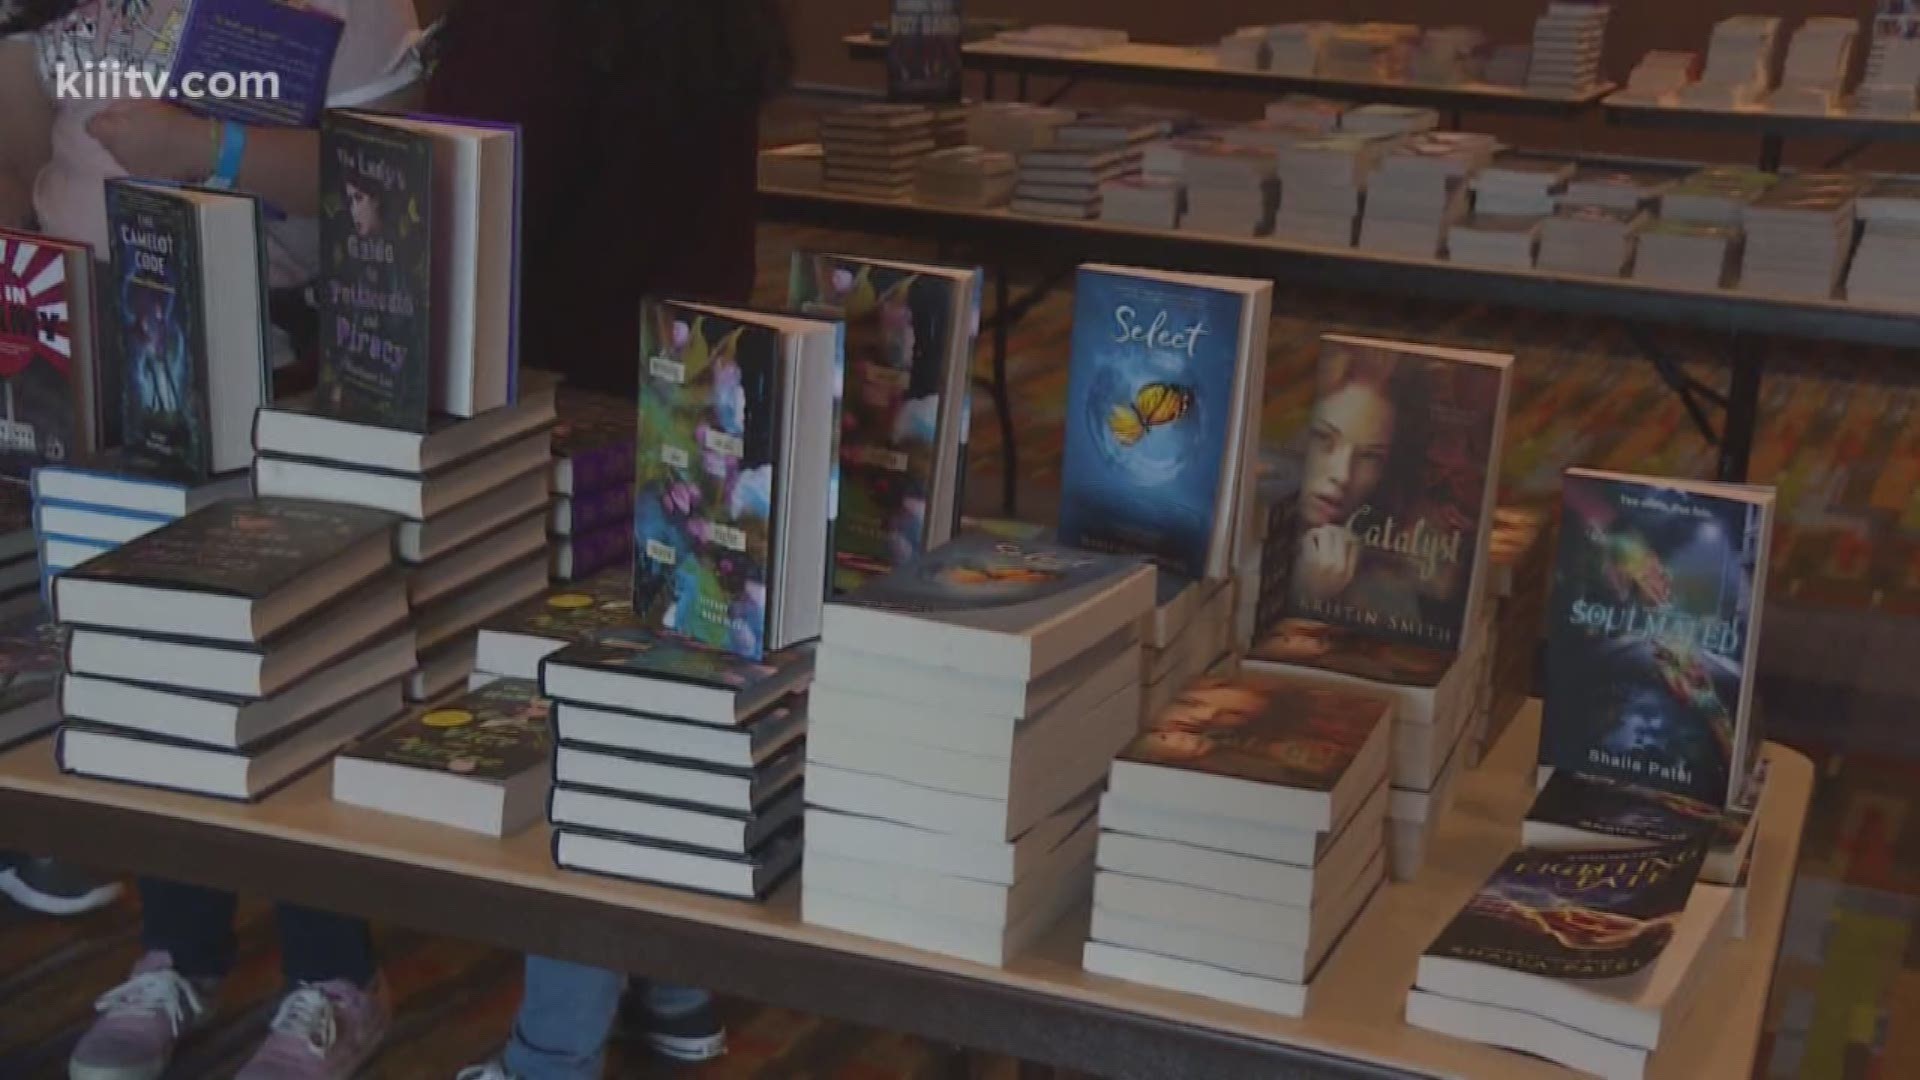 Saturday was a day for teens to nerd out and meet their favorite authors.